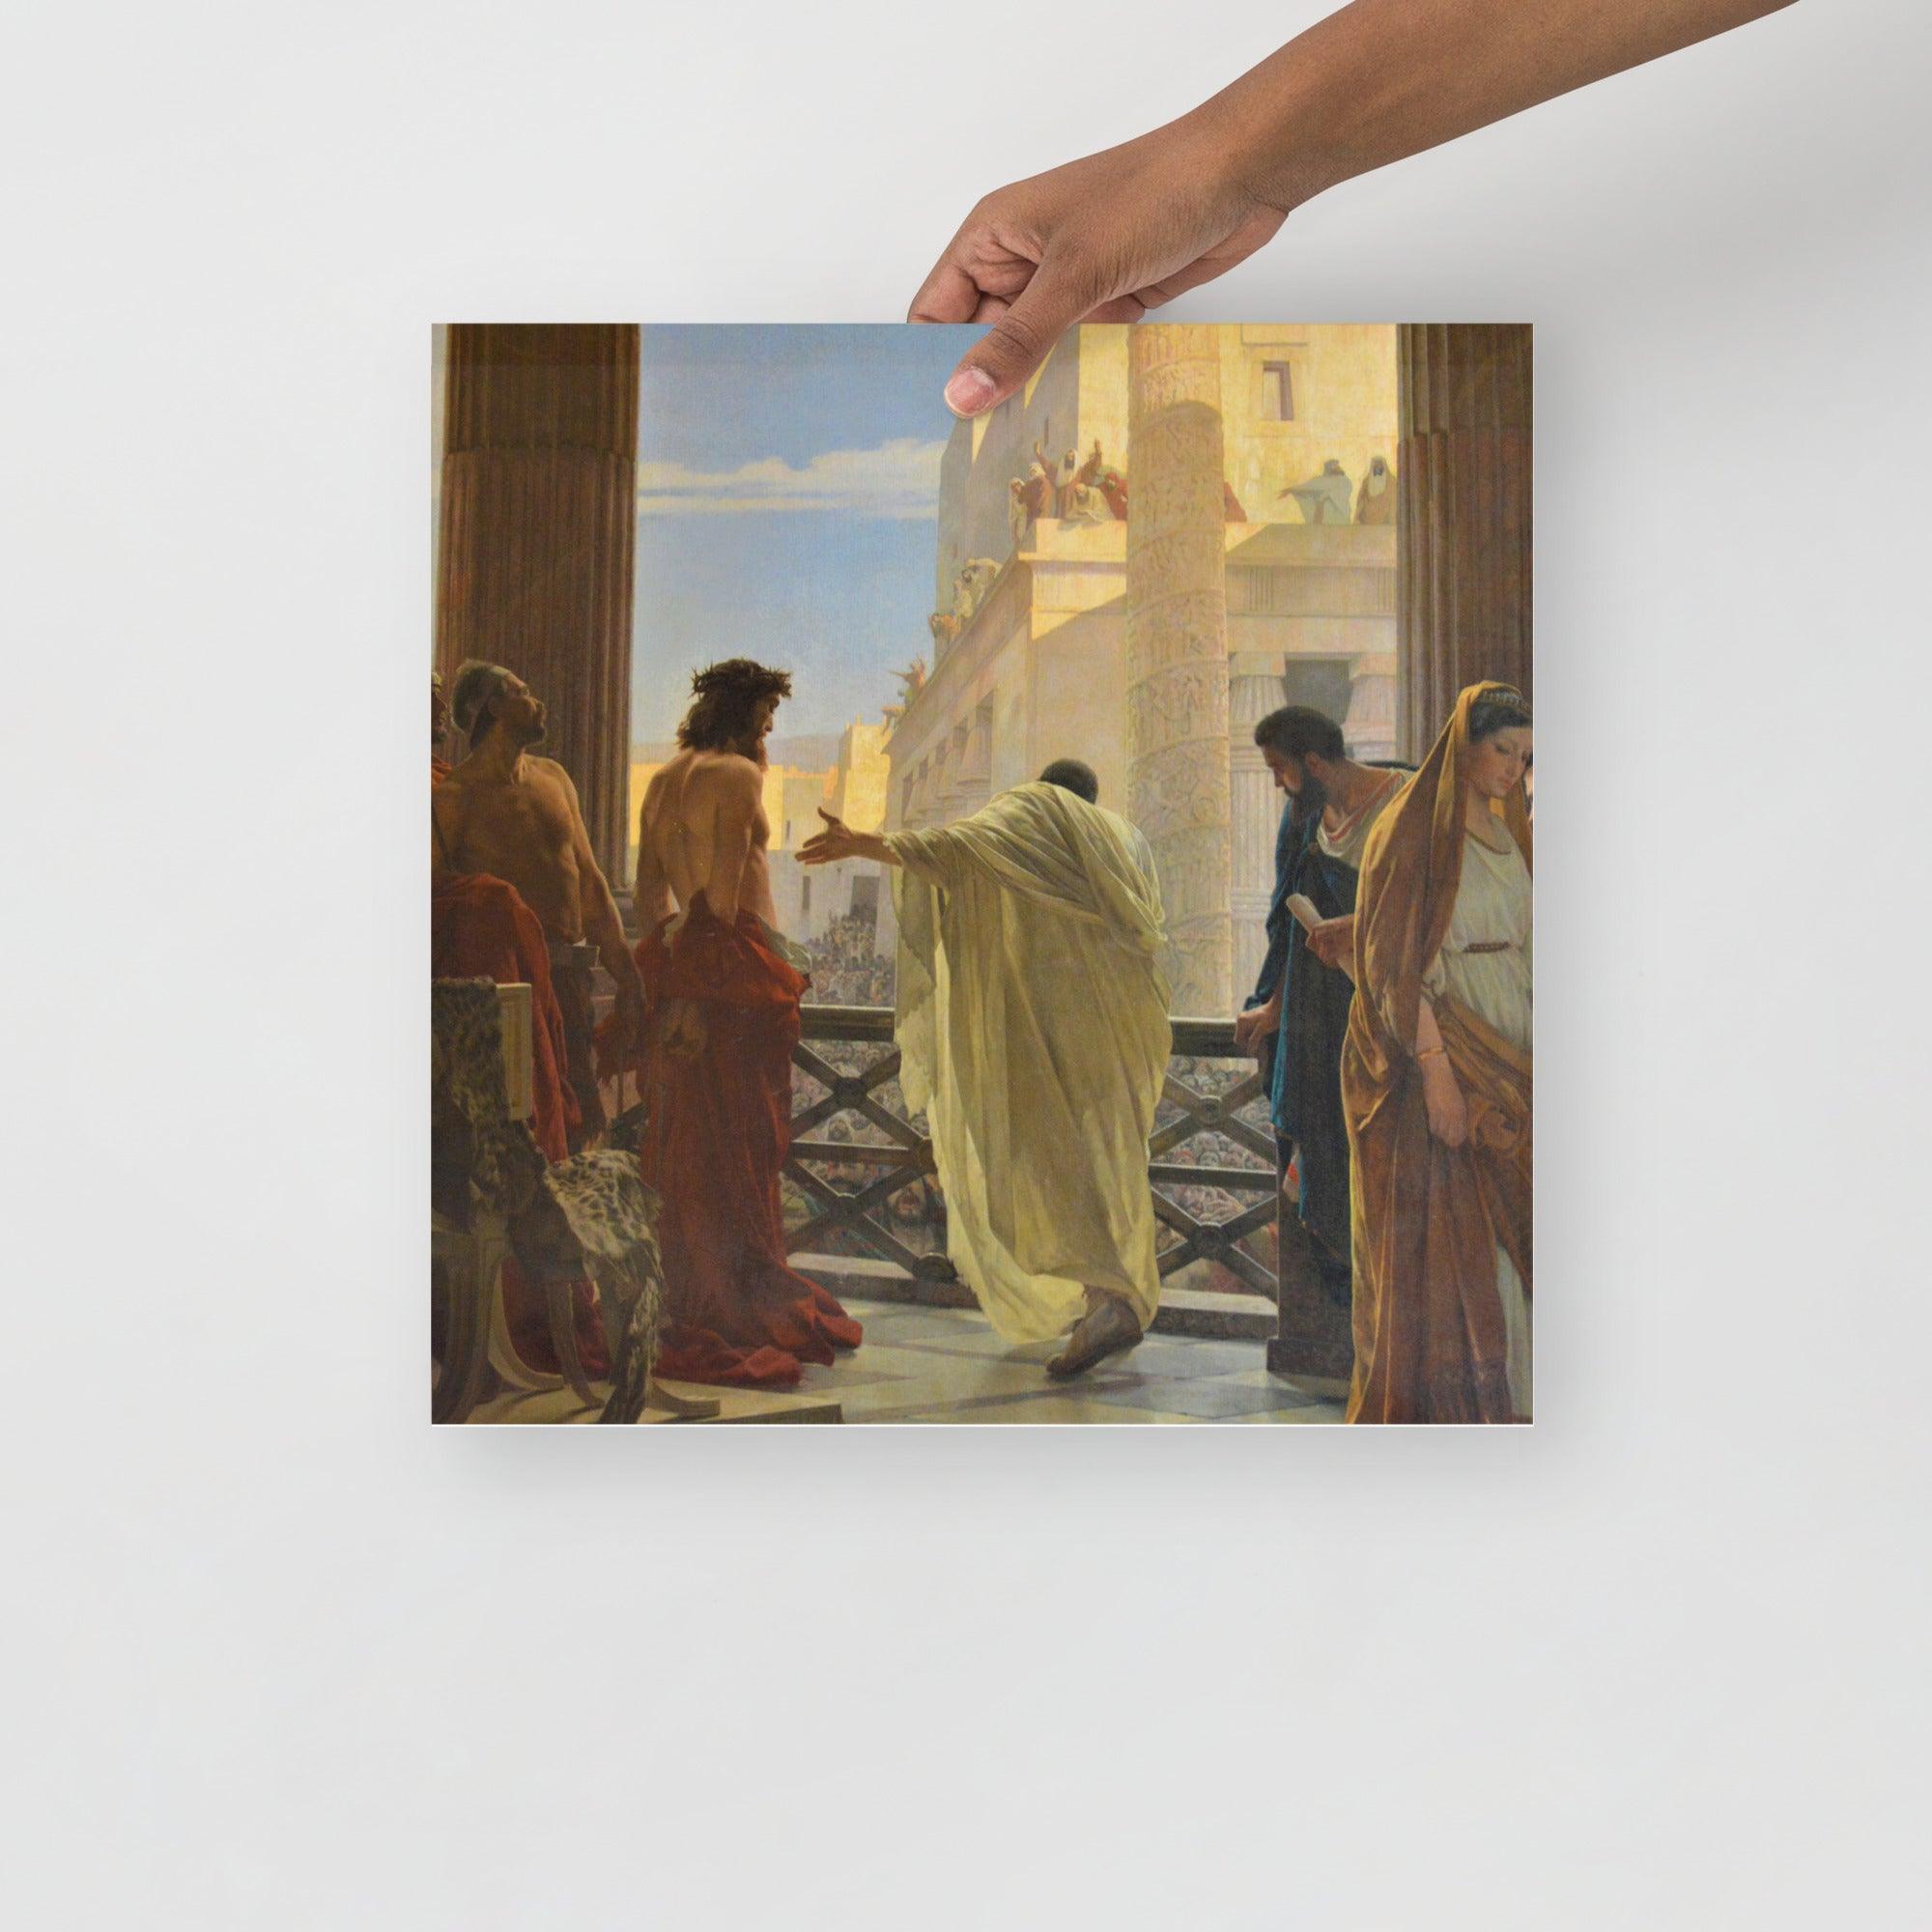 An Ecce Homo poster on a plain backdrop in size 16x16”.